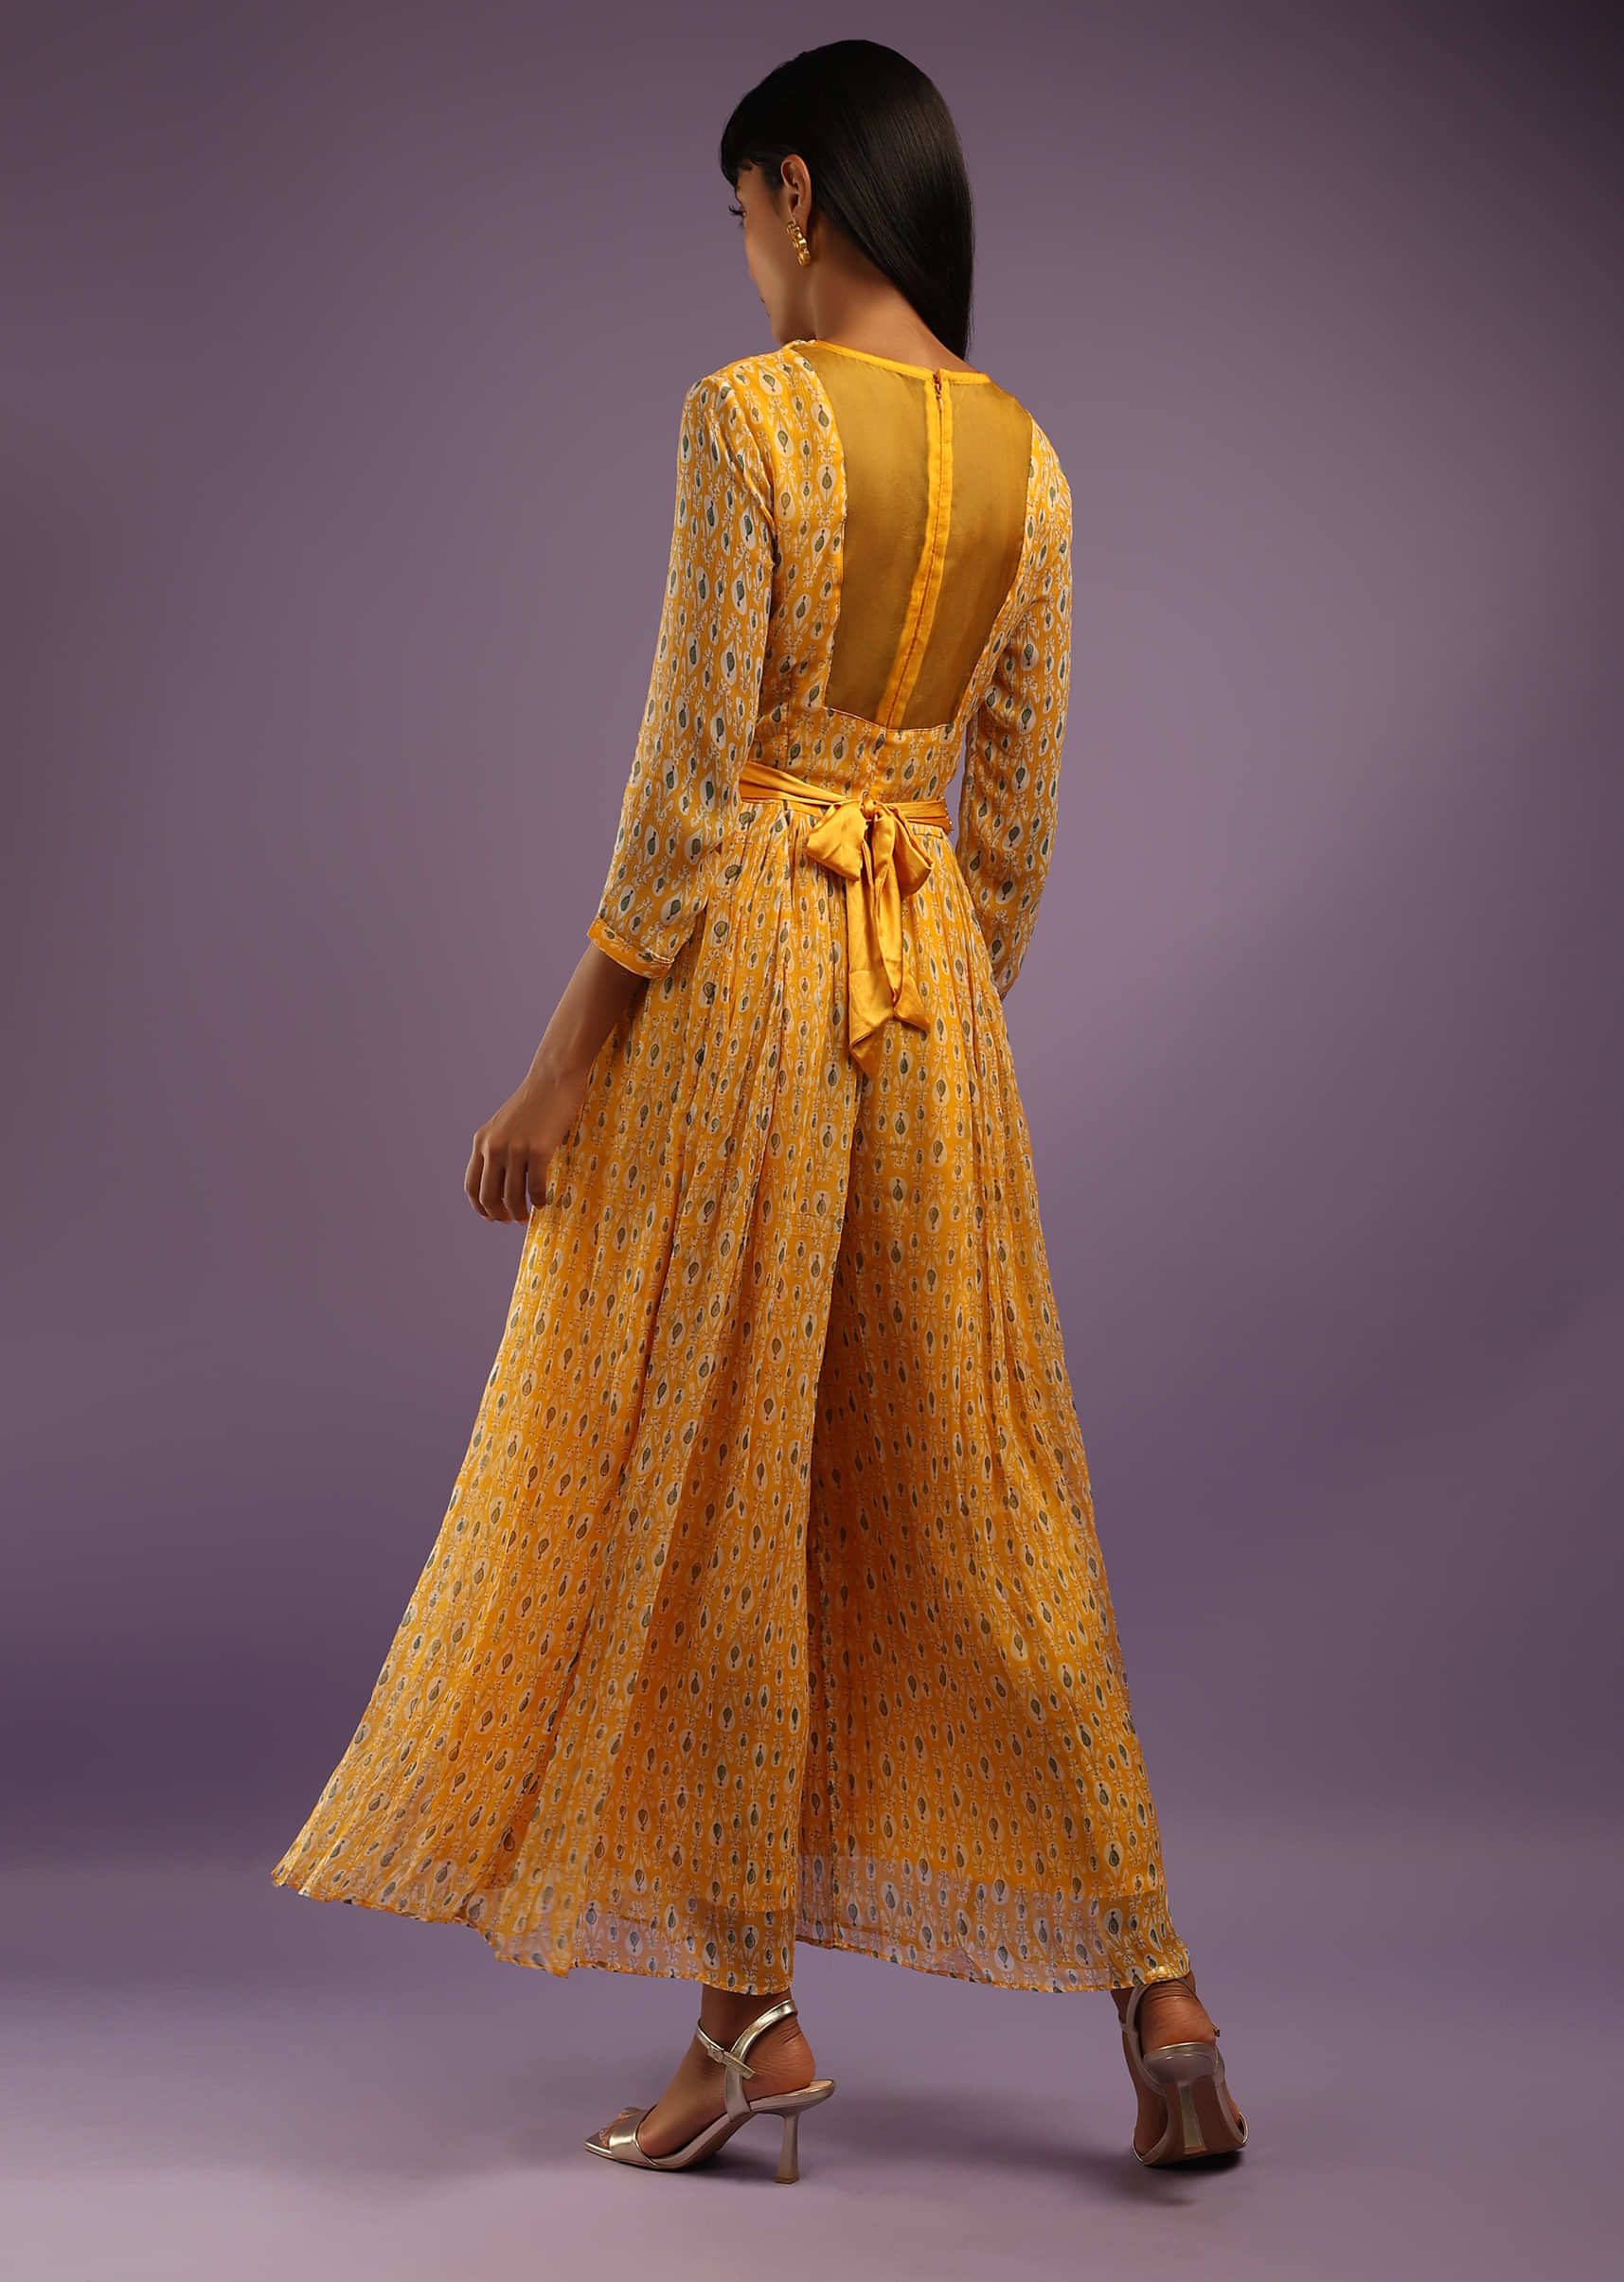 Mustard Jumpsuit In Georgette With All Over Print And Zari Highlights On The Bodice  